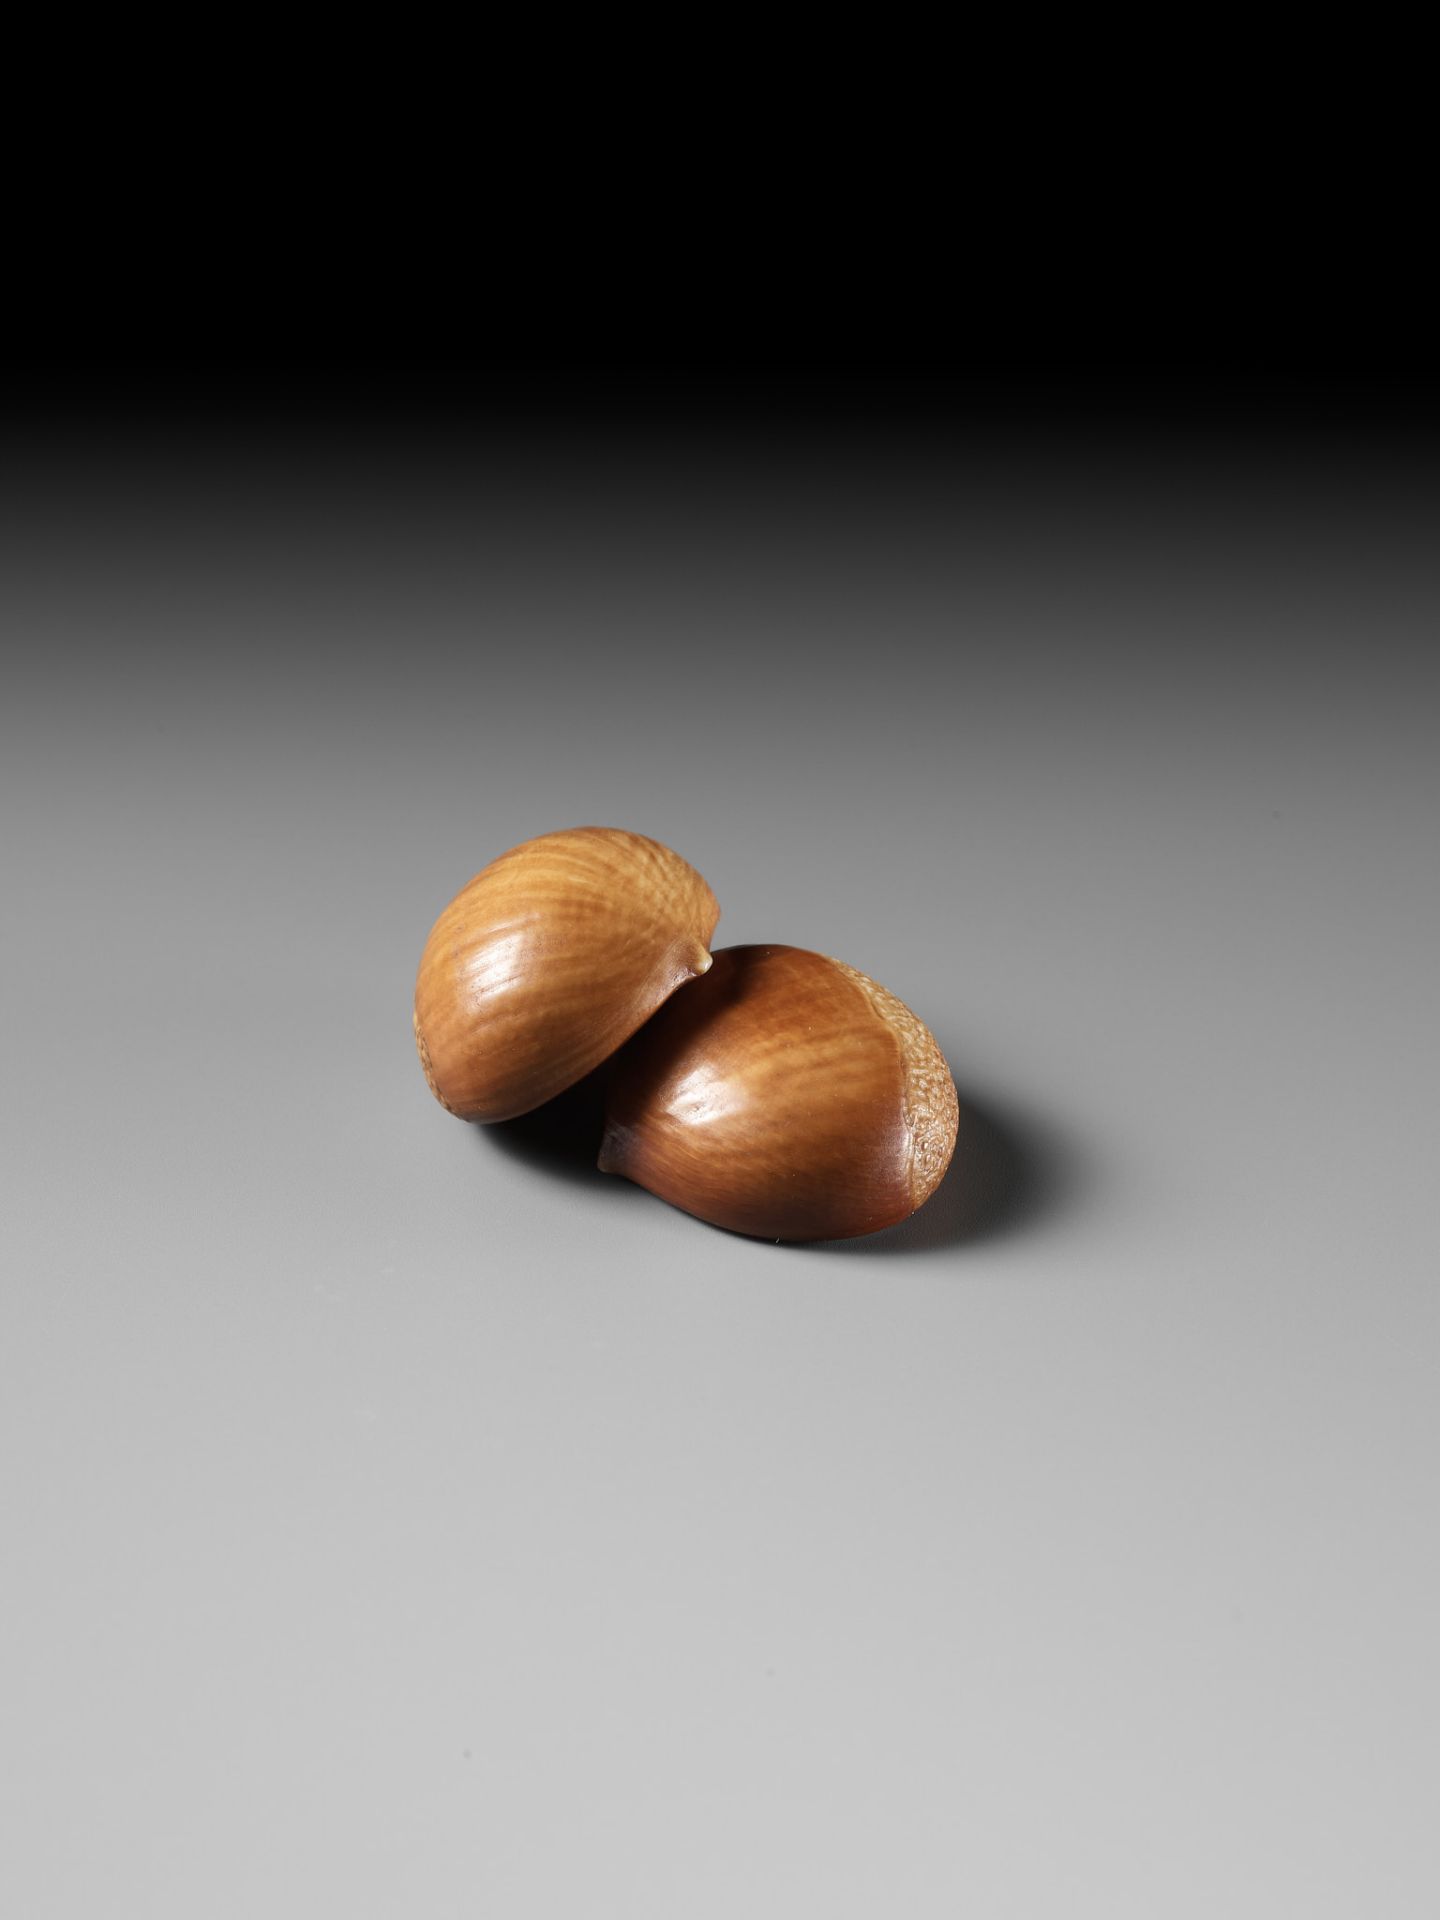 ANDO RYOKUZAN: A FINE LACQUERED IVORY NETSUKE OF TWO CHESTNUTS - Image 3 of 11